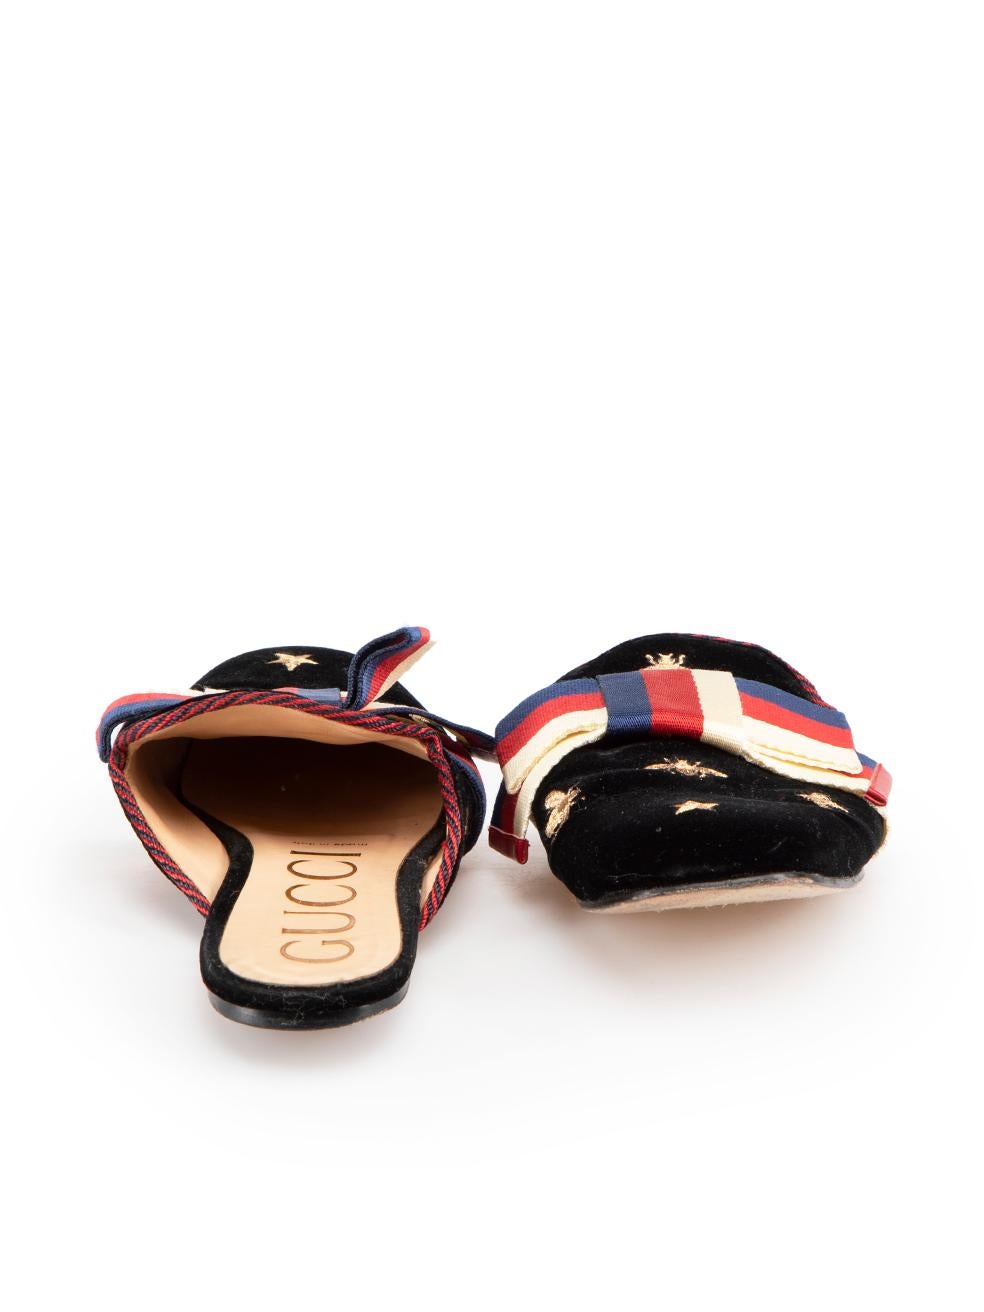 Gucci Black Velvet Sylvie Embroidered Bow Mules Size IT 41 In Good Condition For Sale In London, GB